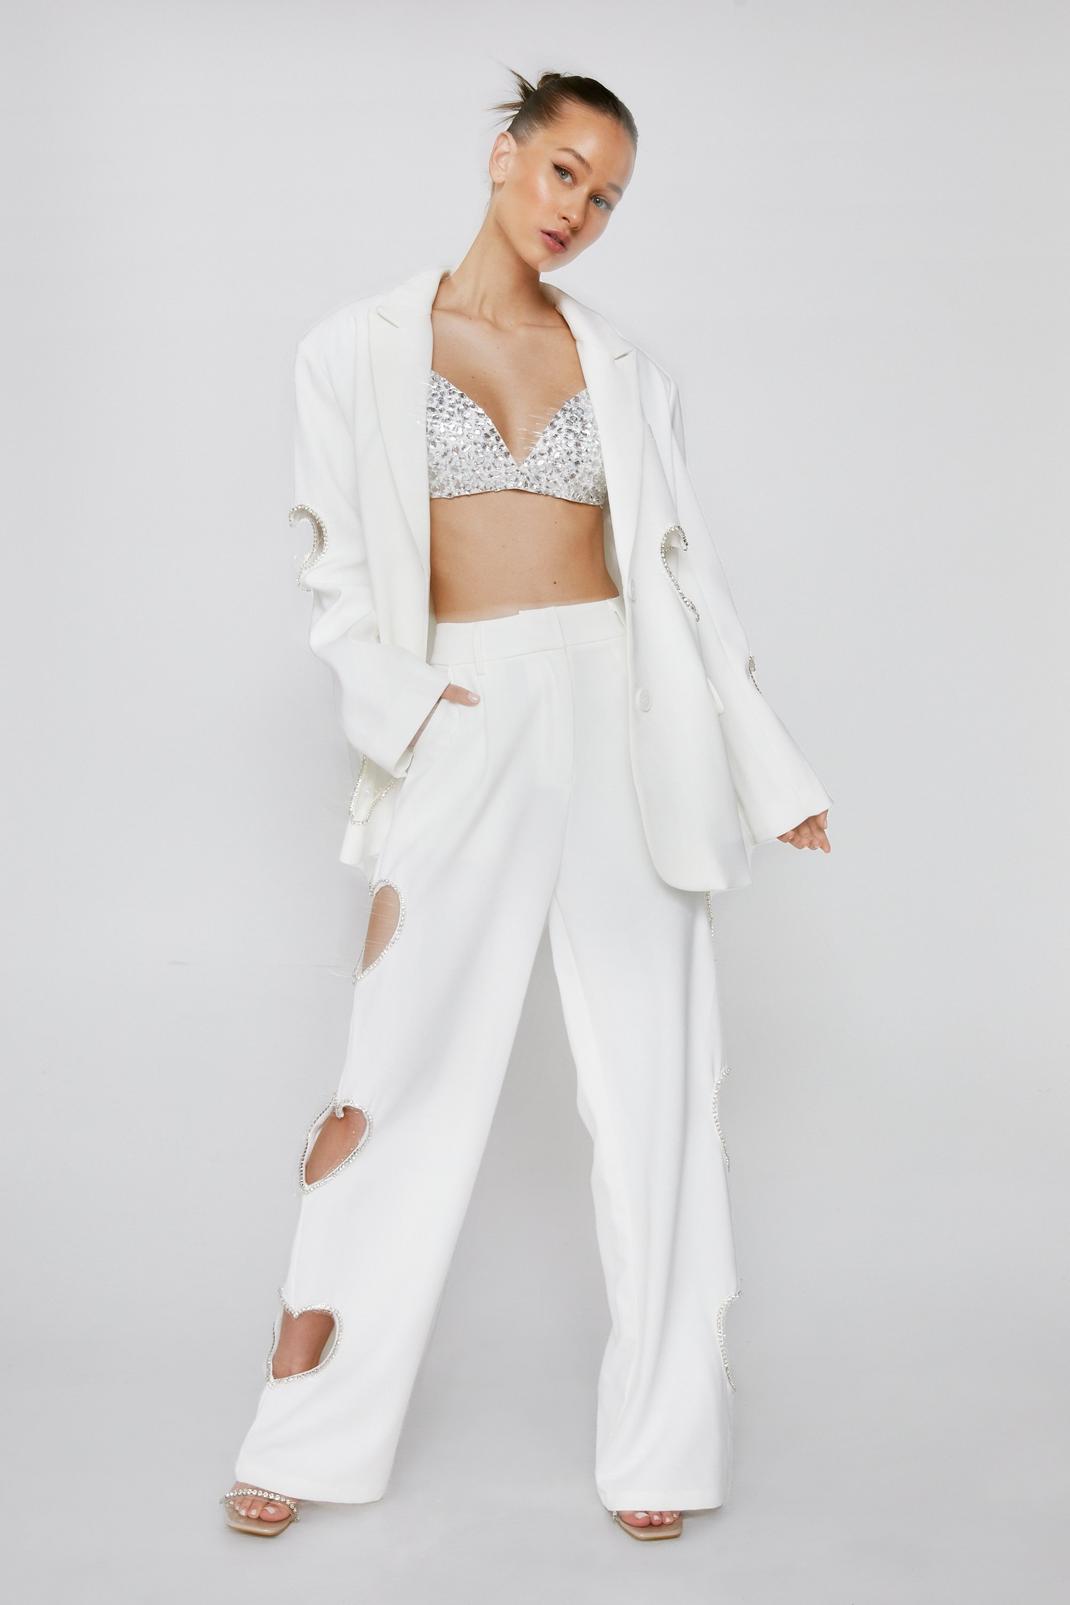 Premium Heart Cut Out Trousers | Nasty Gal